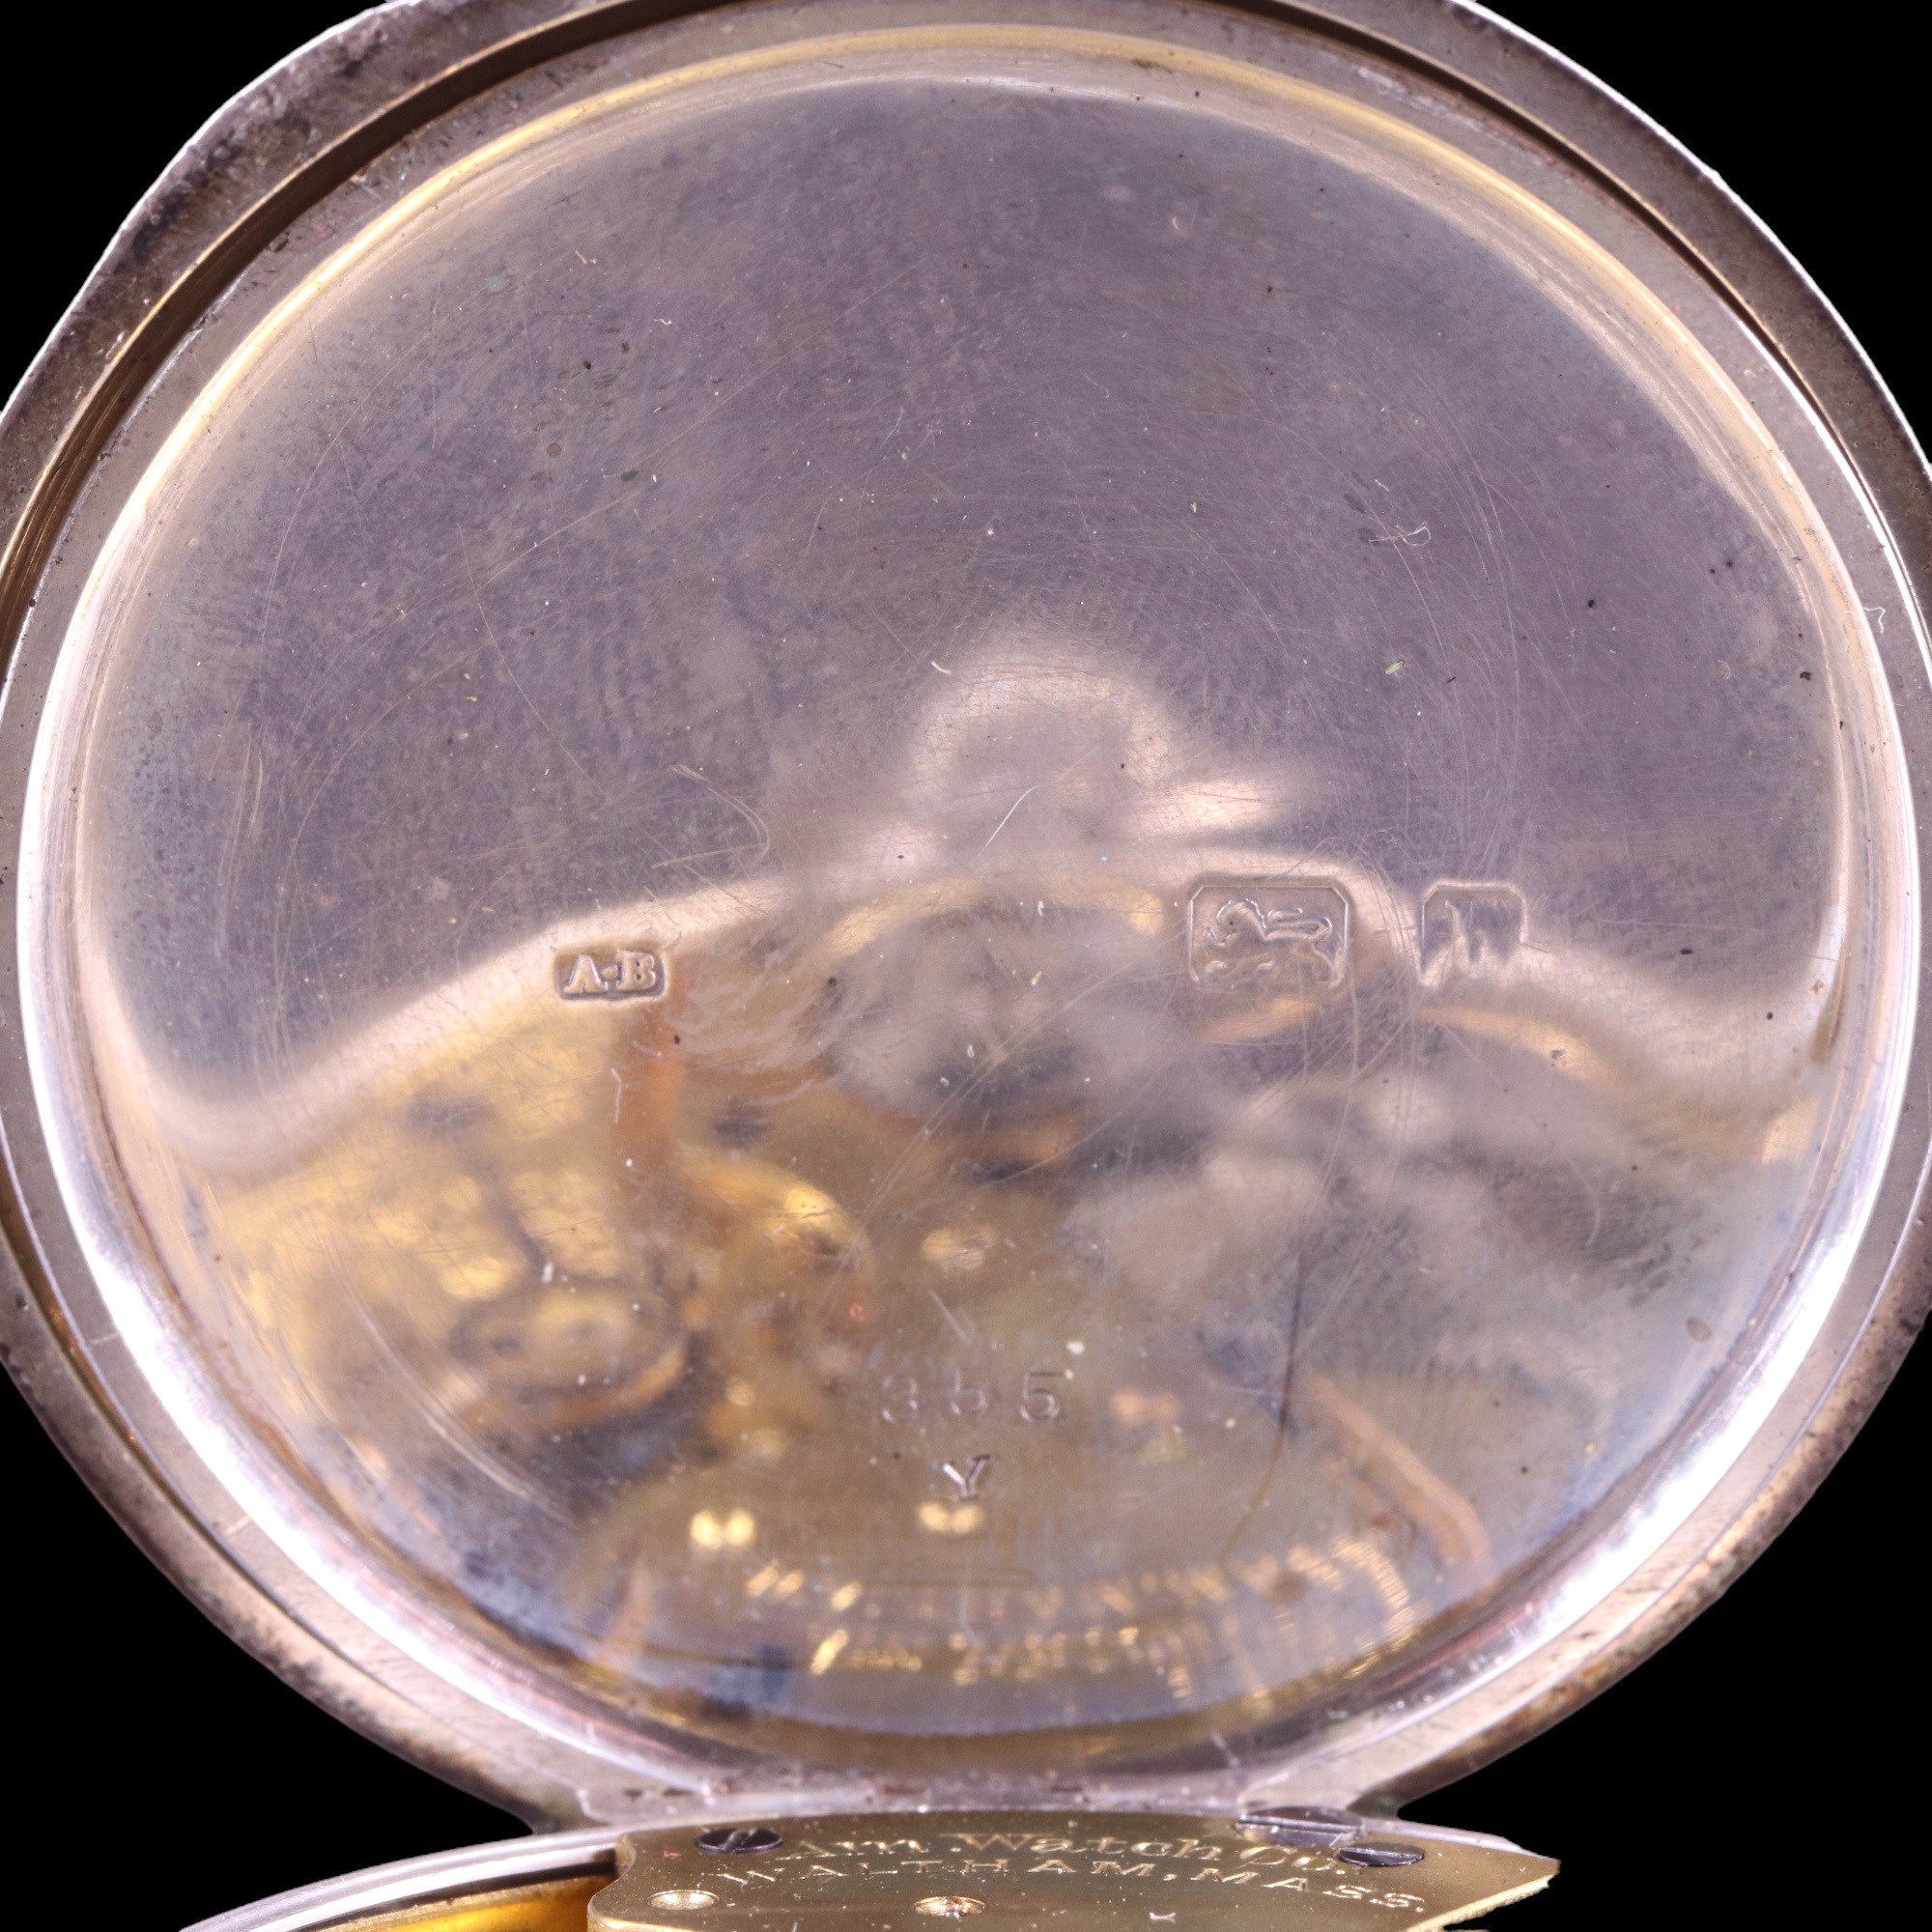 An Edwardian silver pocket watch by Waltham, having a crown-wound movement and white enamel face - Image 4 of 5